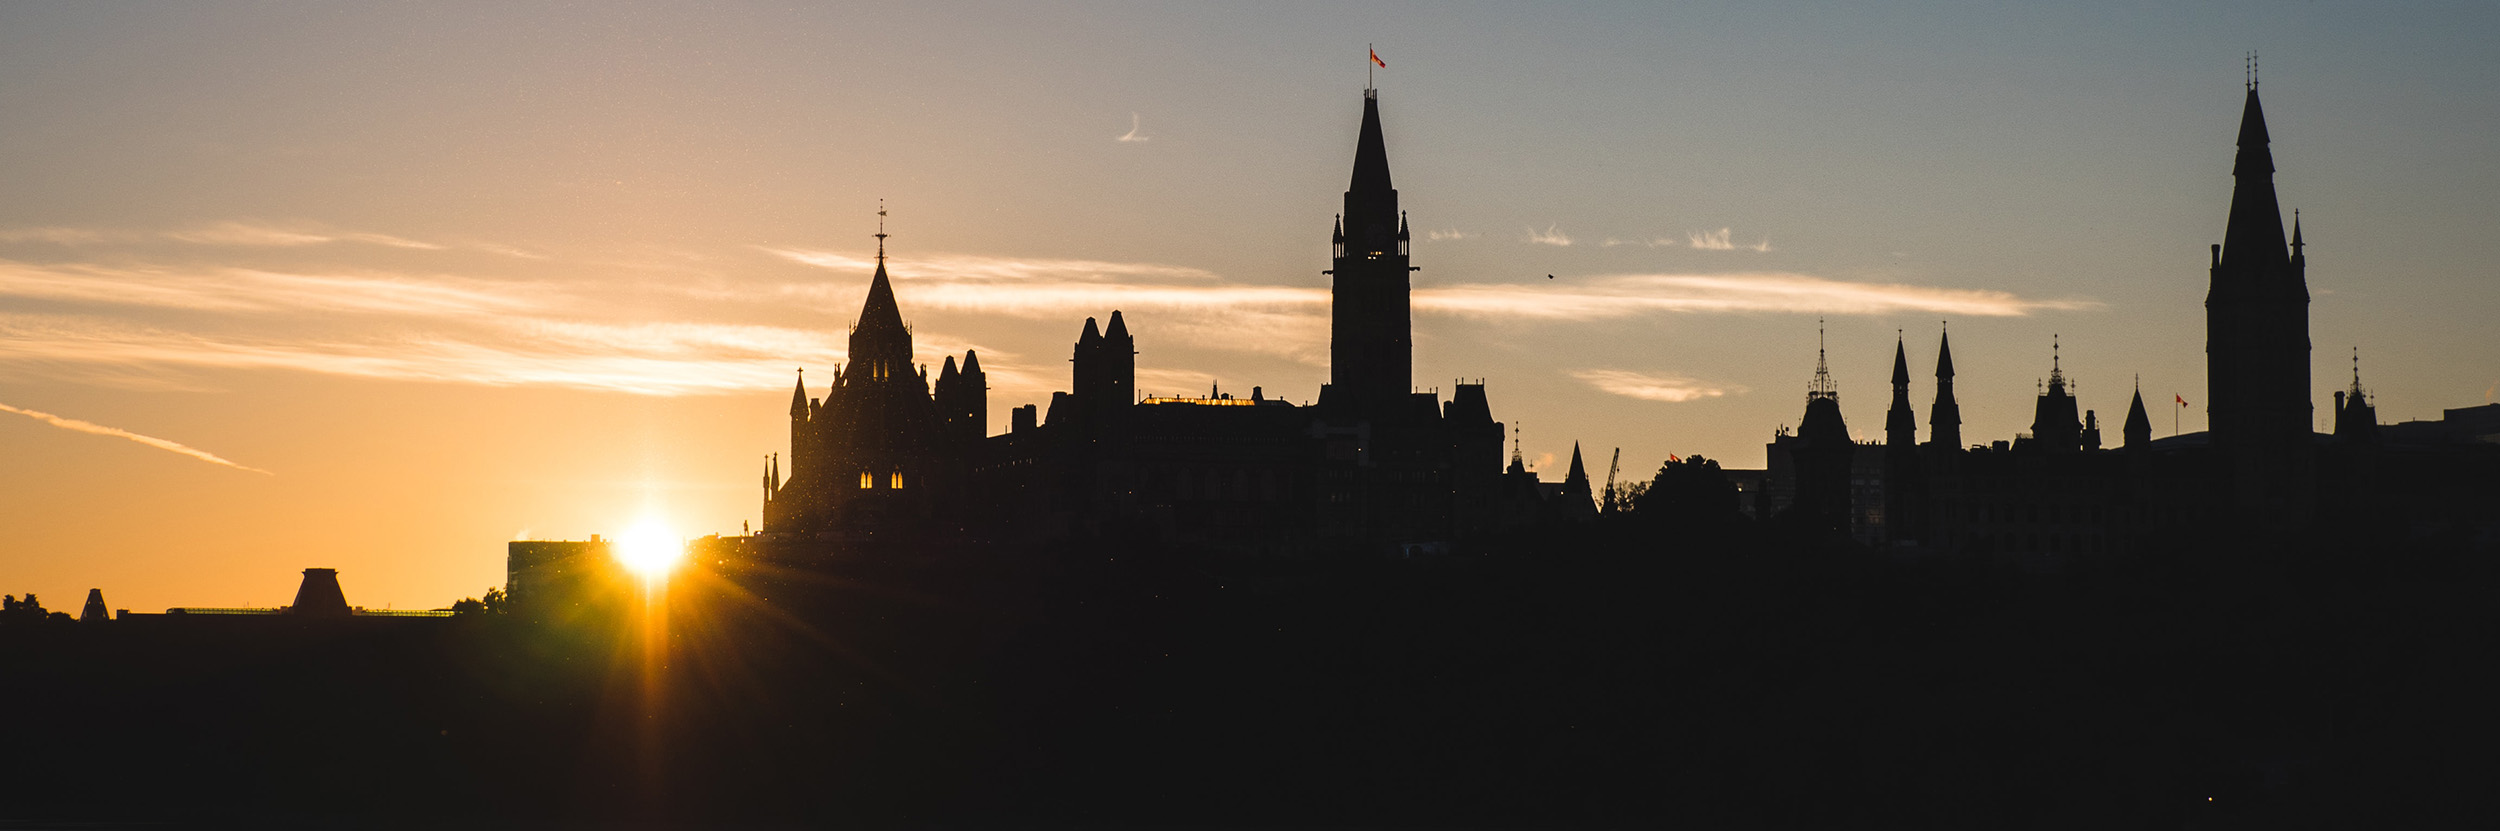 Silhouette of parliament buildings